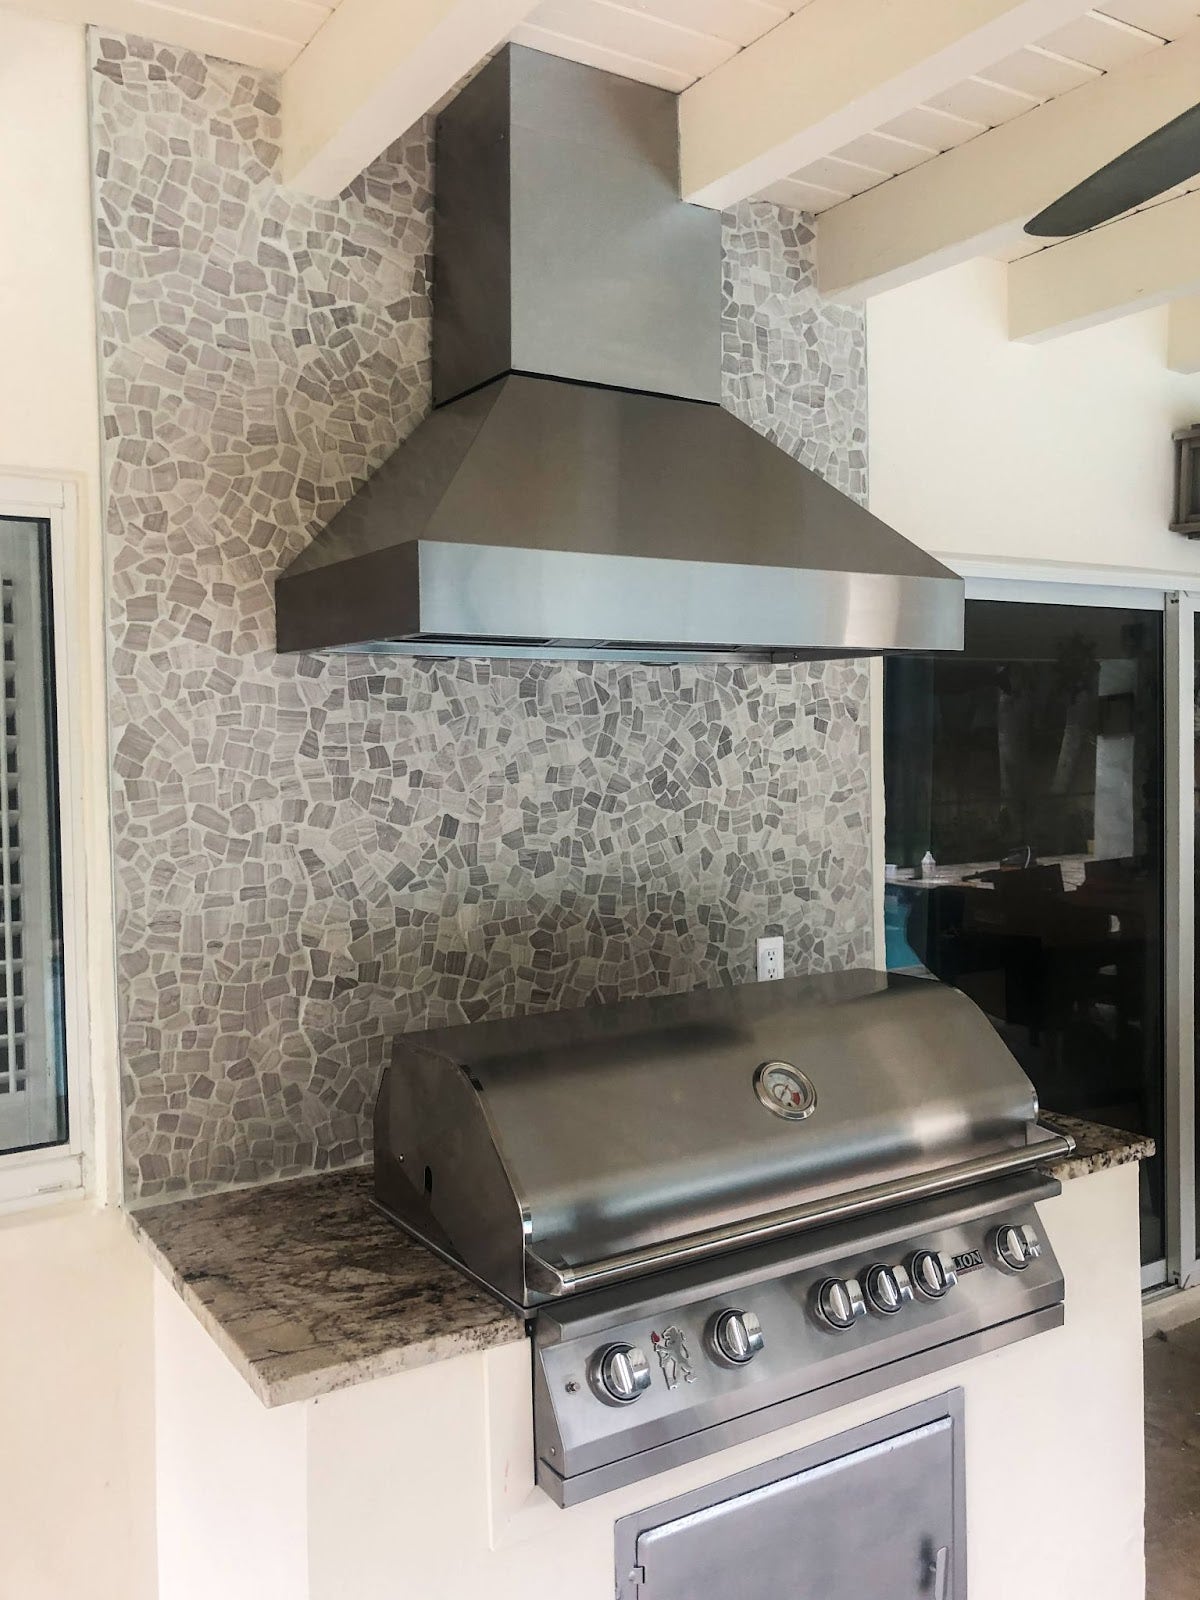 Fresh & Airy BBQ Area: Proline hood keeps smoke at bay in this bright outdoor kitchen. Mosaic backsplash and granite countertops add a touch of style. Perfect for sunny BBQ days! - Proline Range Hoods - prolinerangehoods.com 